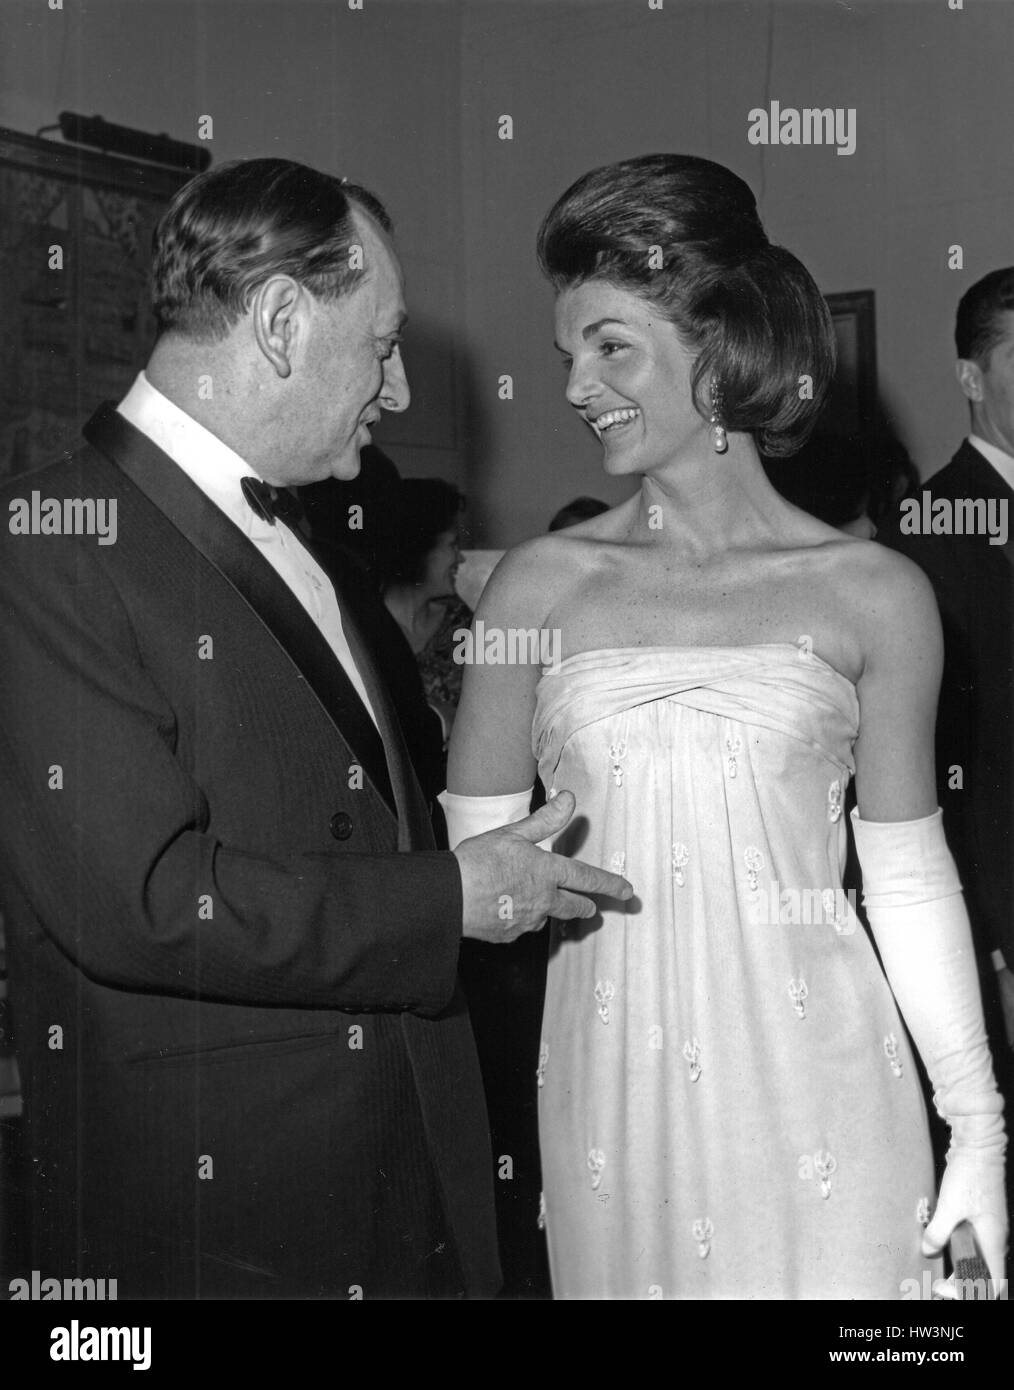 First lady Jacqueline Bouvier Kennedy left and André Malraux Minister of Cultural Affairs for France right the opening of the Mona Lisa exhibit the National Gallery of Art in Washington DC on January 8 1963. Credit: Arnie Sachs / CNP /MediaPunch Stock Photo